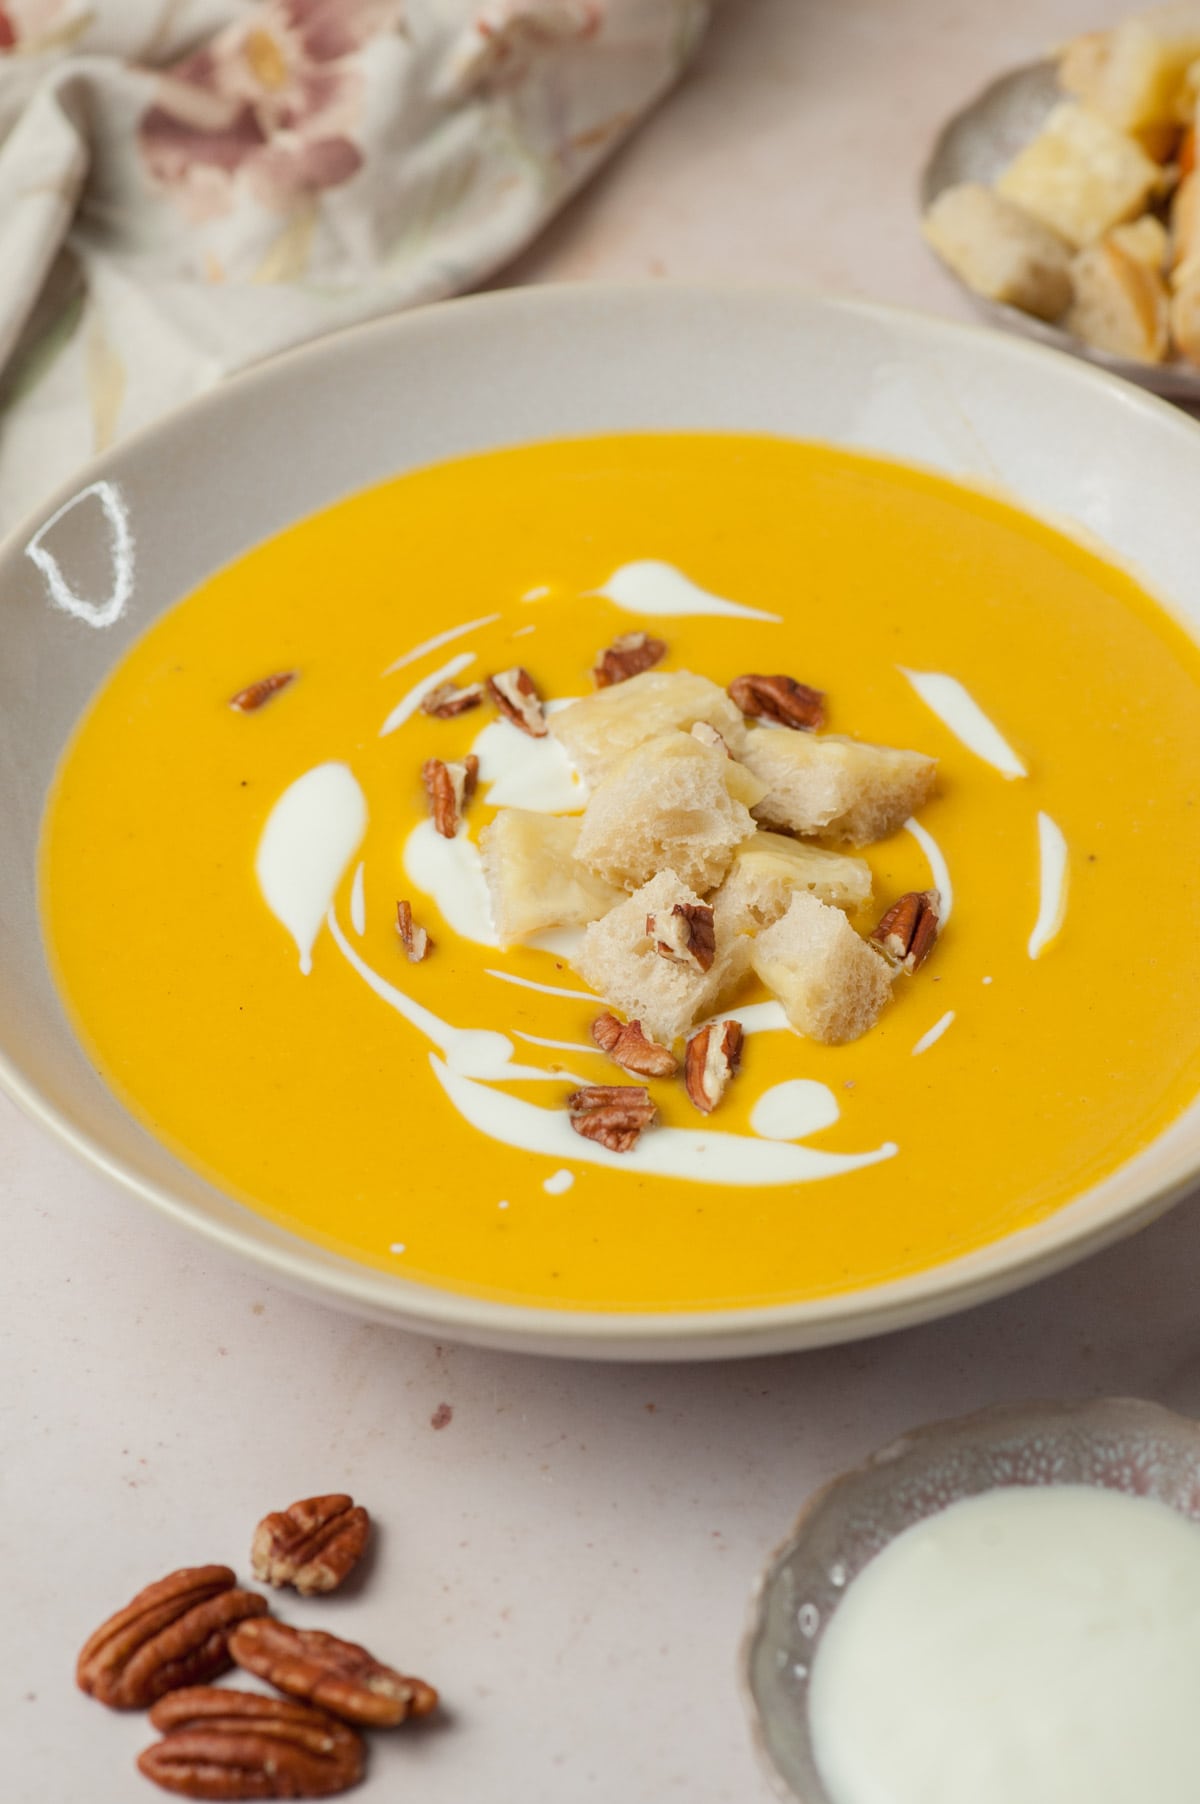 Butternut squash soup in a beige bowl topped with cheese croutons, pecans, and swirls of yogurt.